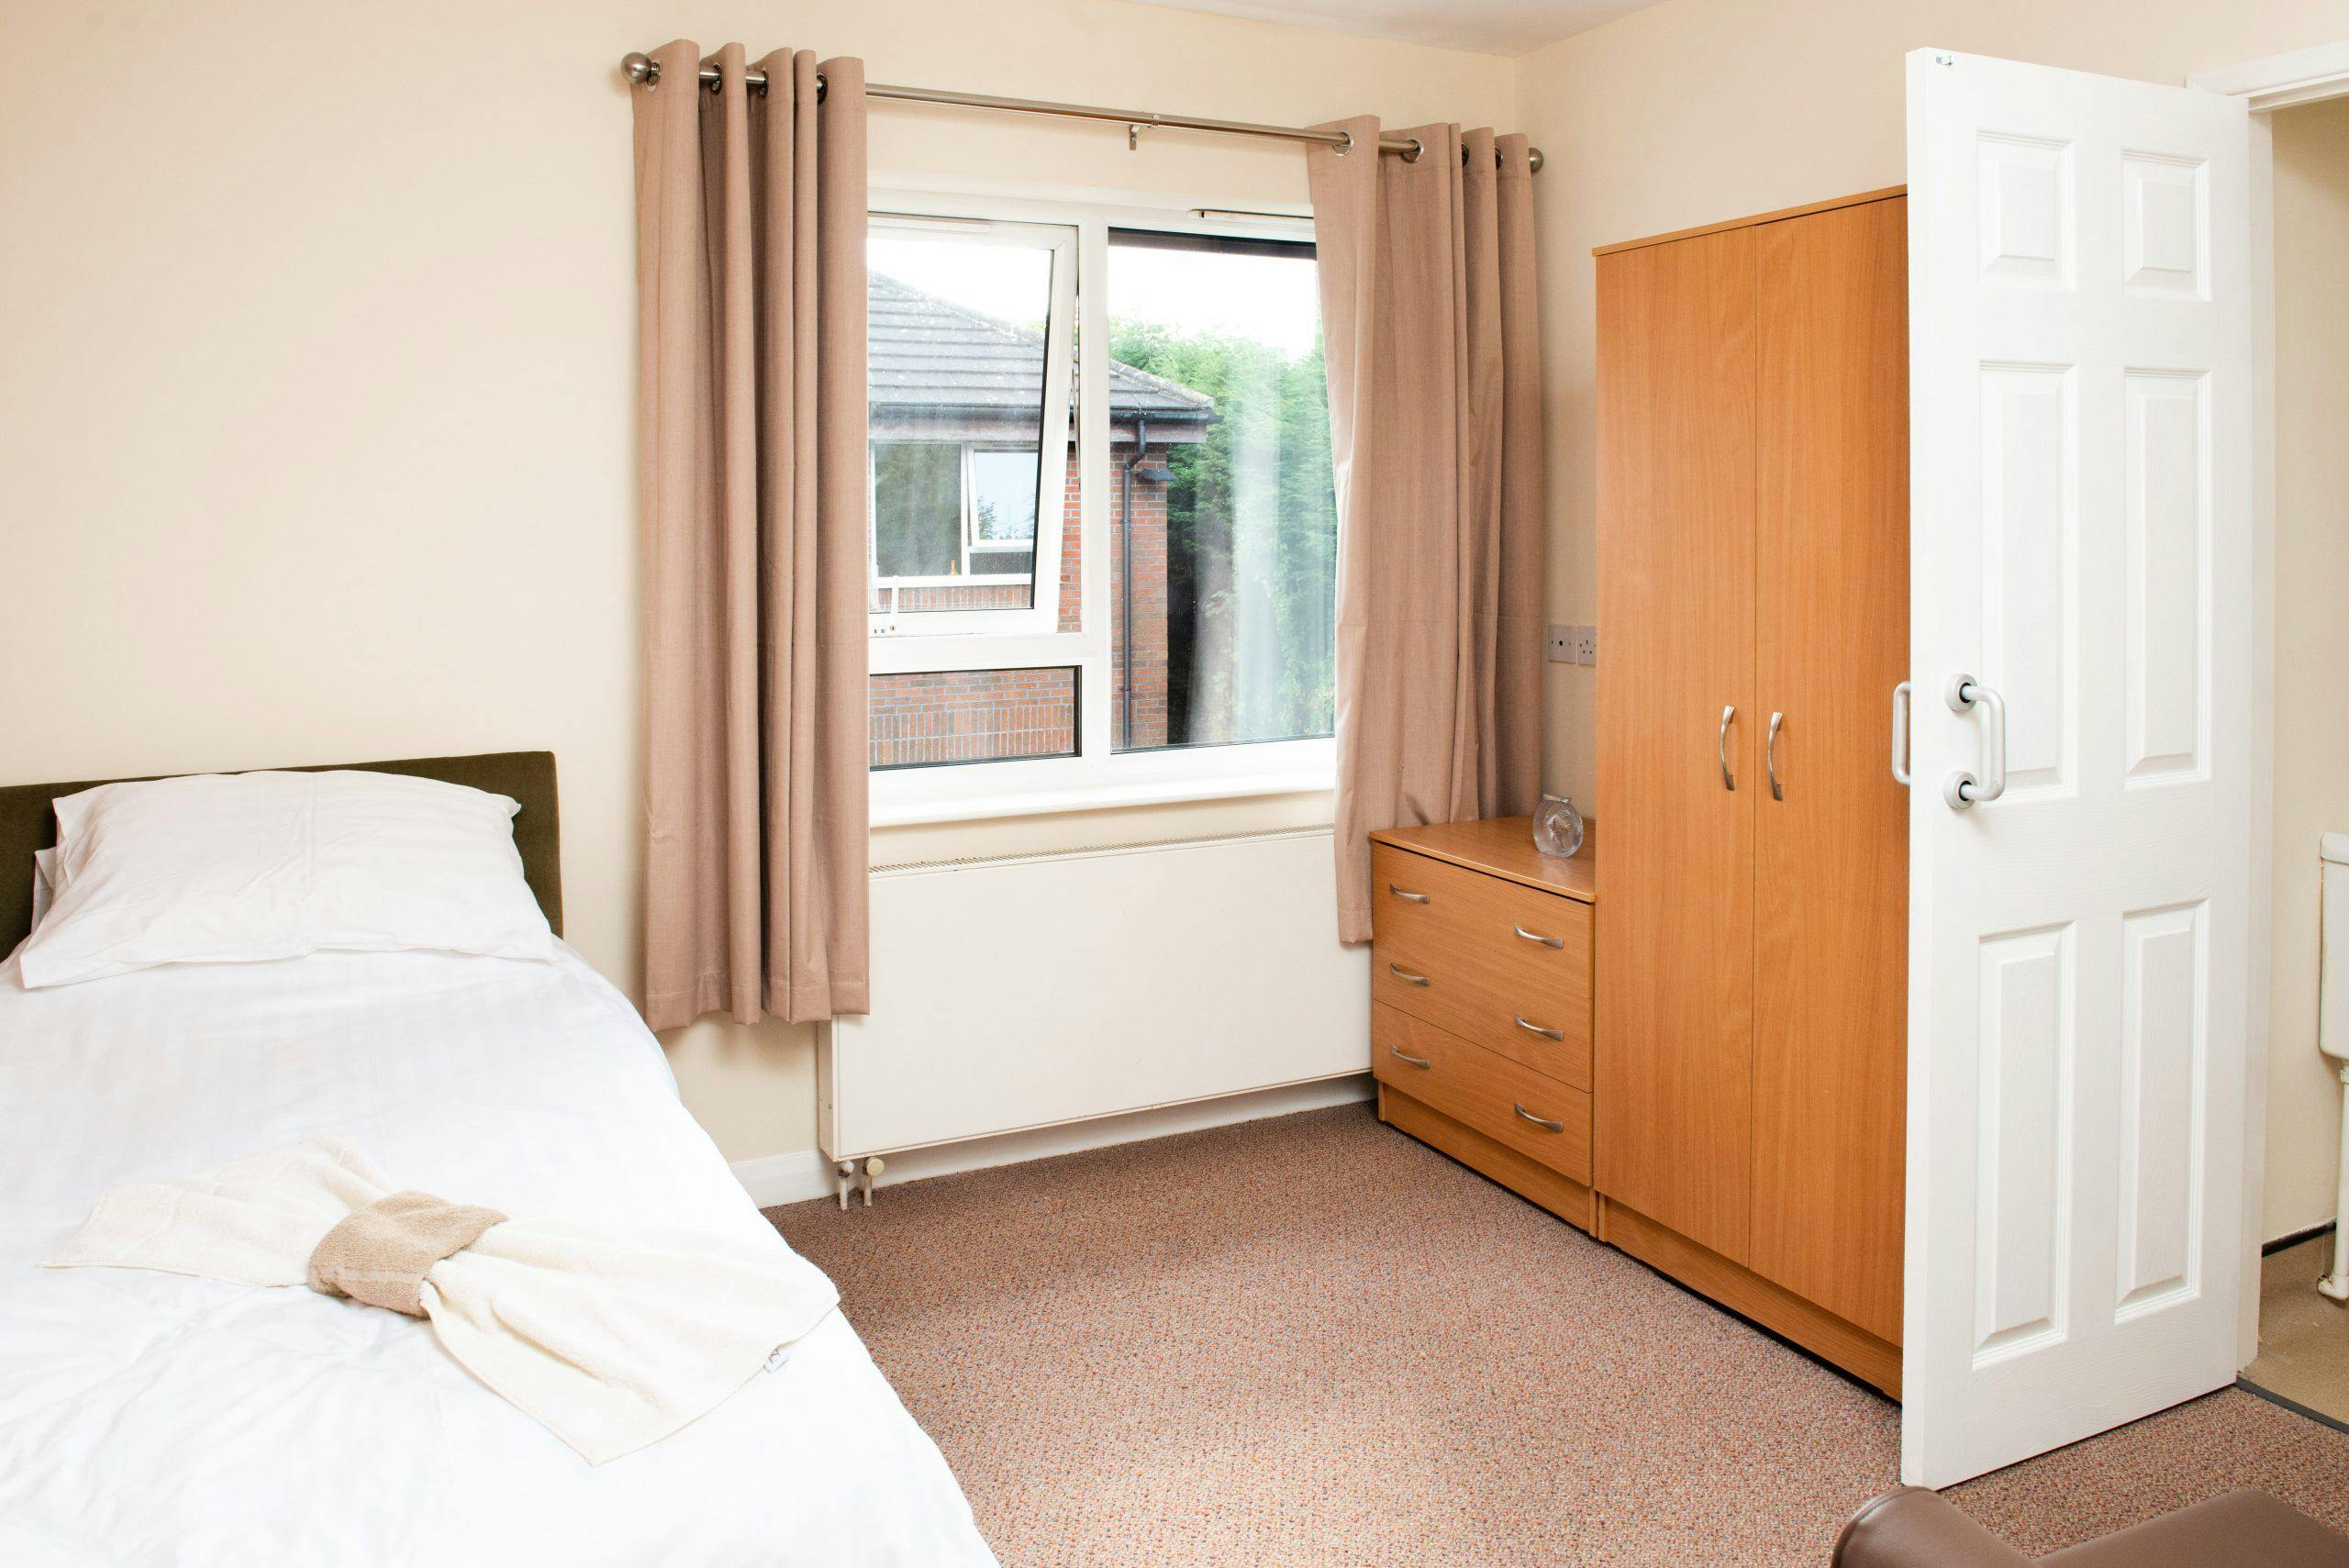 Bedroom of Codnor Park Care Home in Ripley, Derbyshire